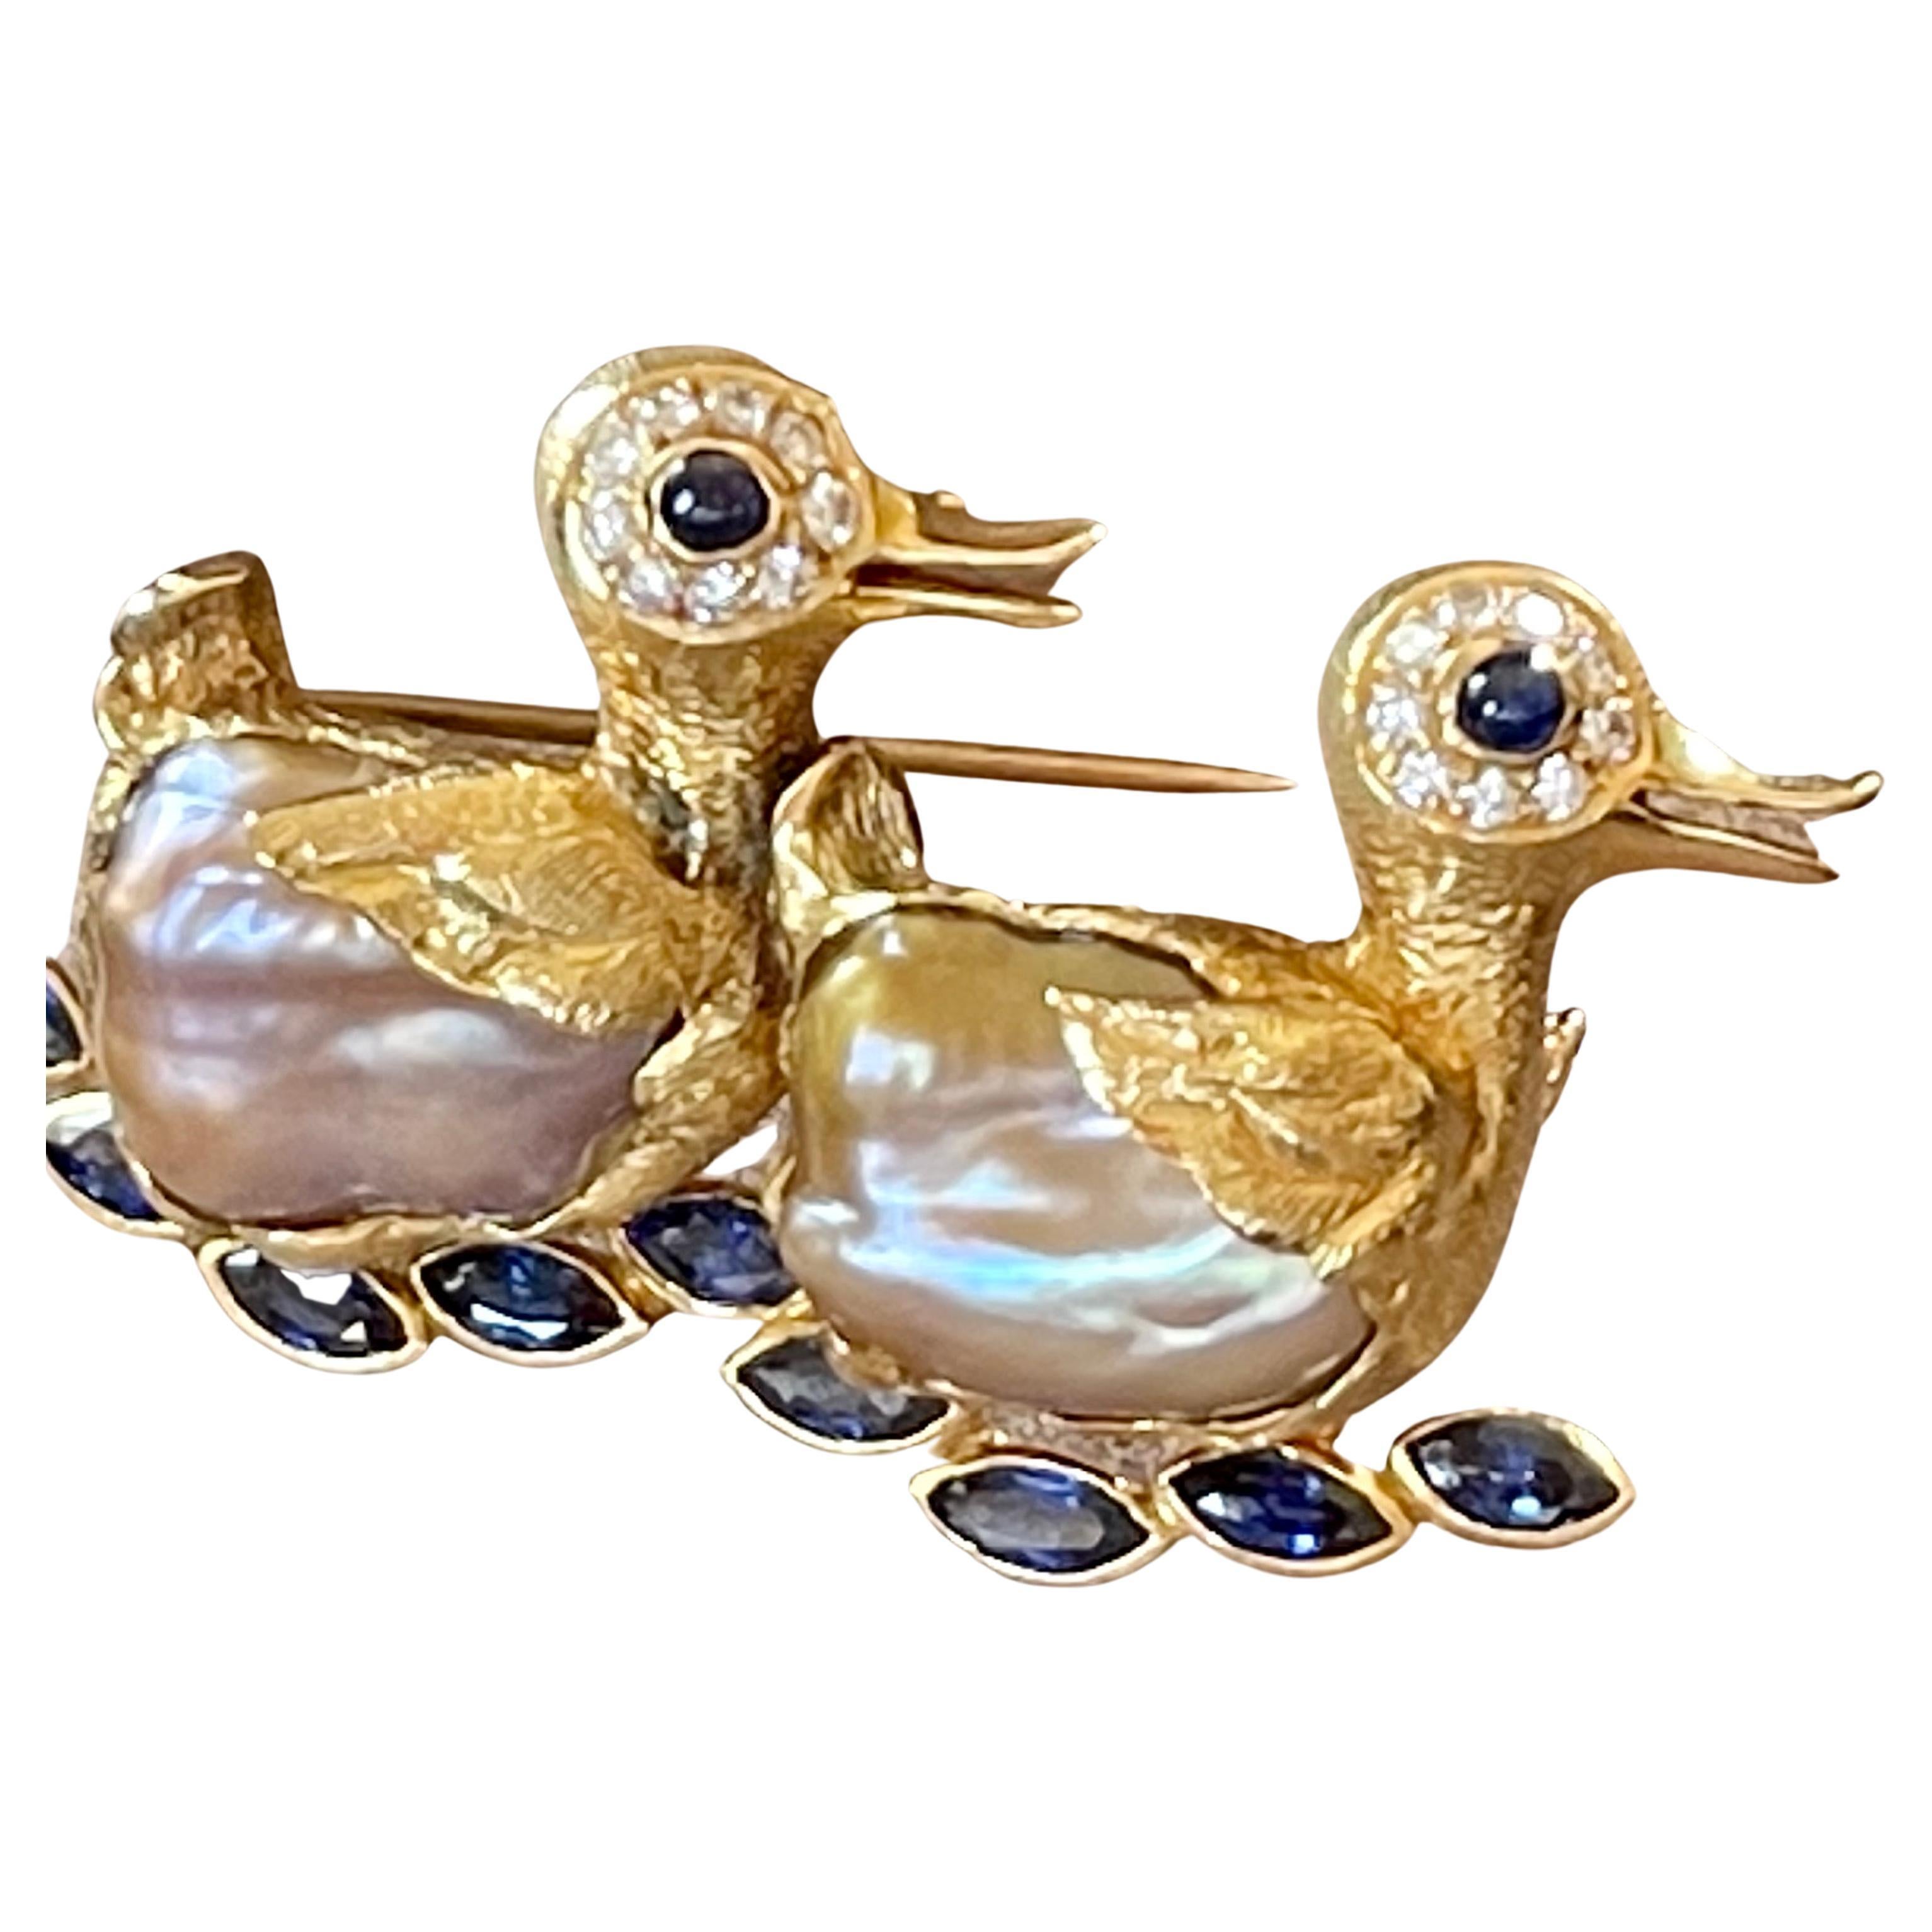 An adorable 18 K yellow Gold Duck brooch featuring 2 baroque freshwater perals that build the duck's body. 9 marquise shape blue Sapphires weighing approximately 2.50 ct, 4 Sapphire Cabochons for the eyes and 18 tiny round brilliant cut Diamonds